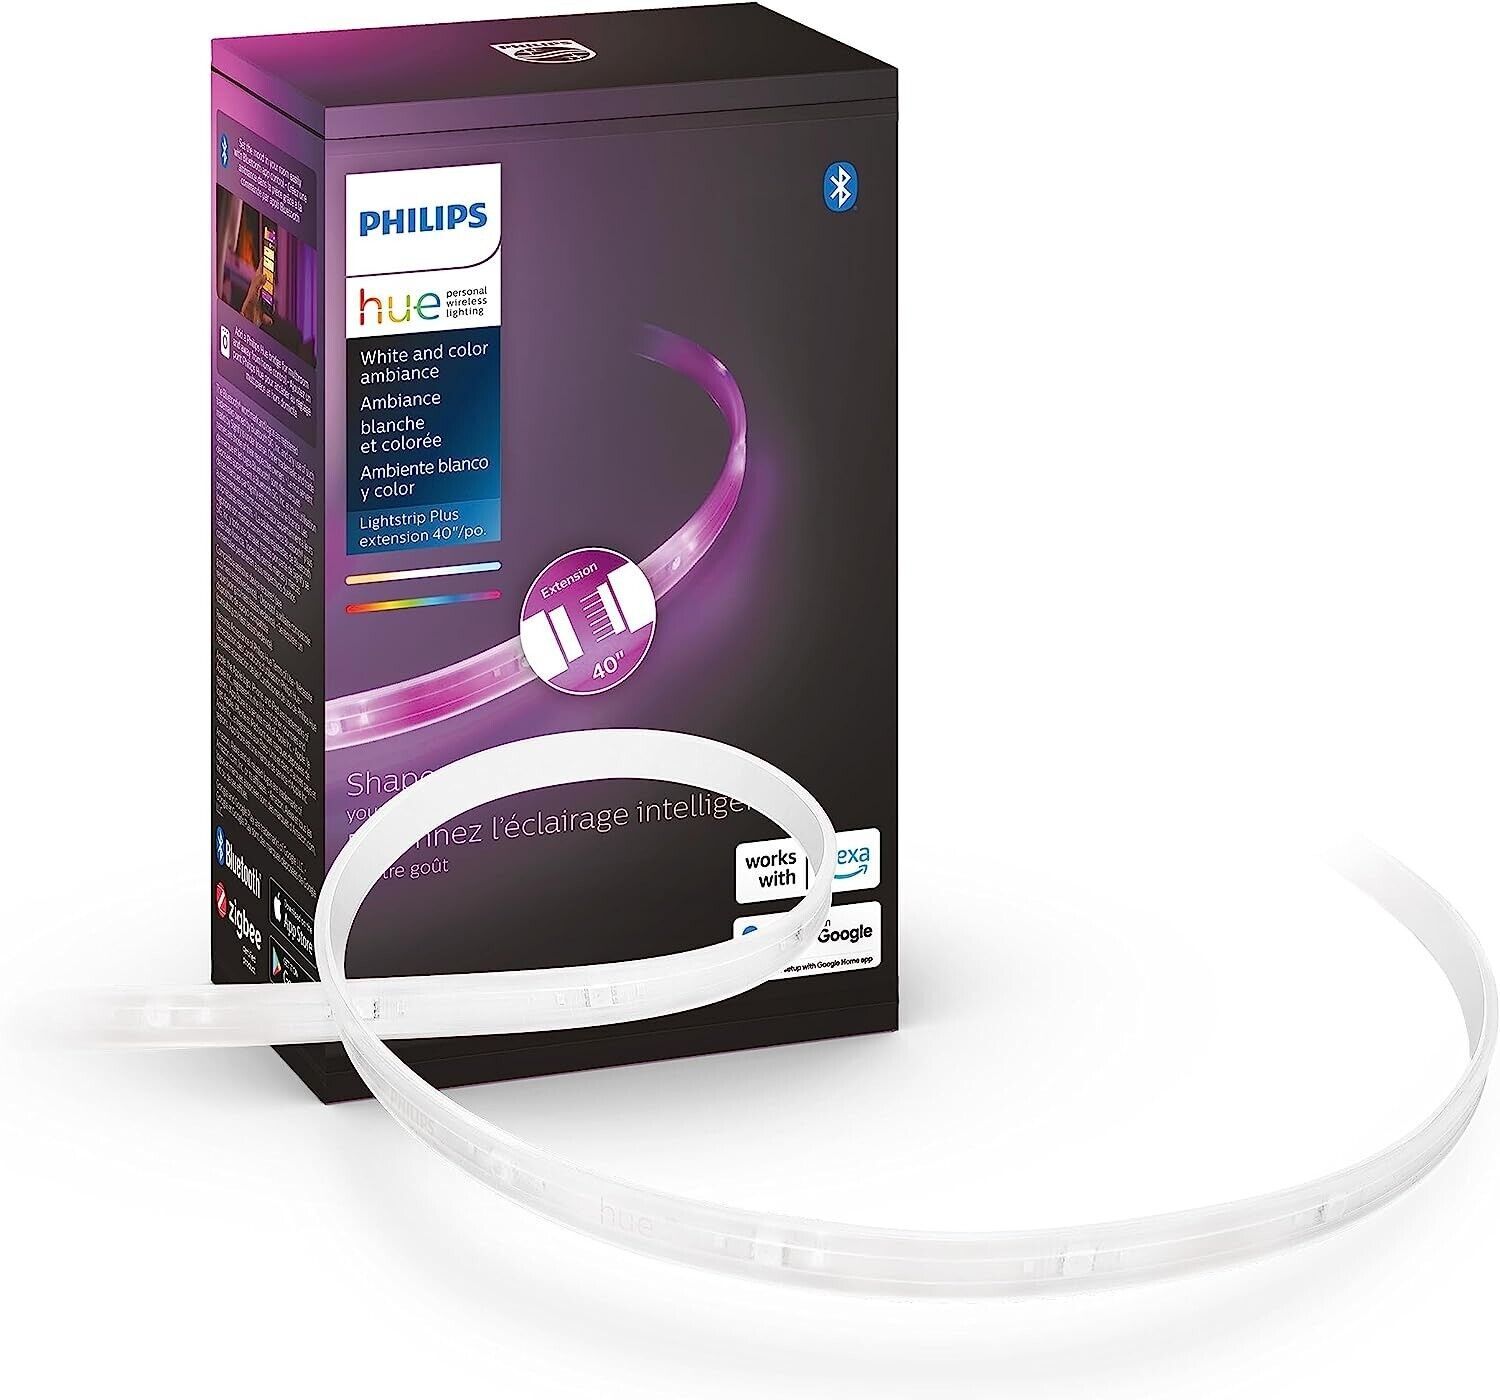 Philips Hue LED Lightstrip Plus Extension 1m 40" White and Color Ambiance 555326 - $24.65